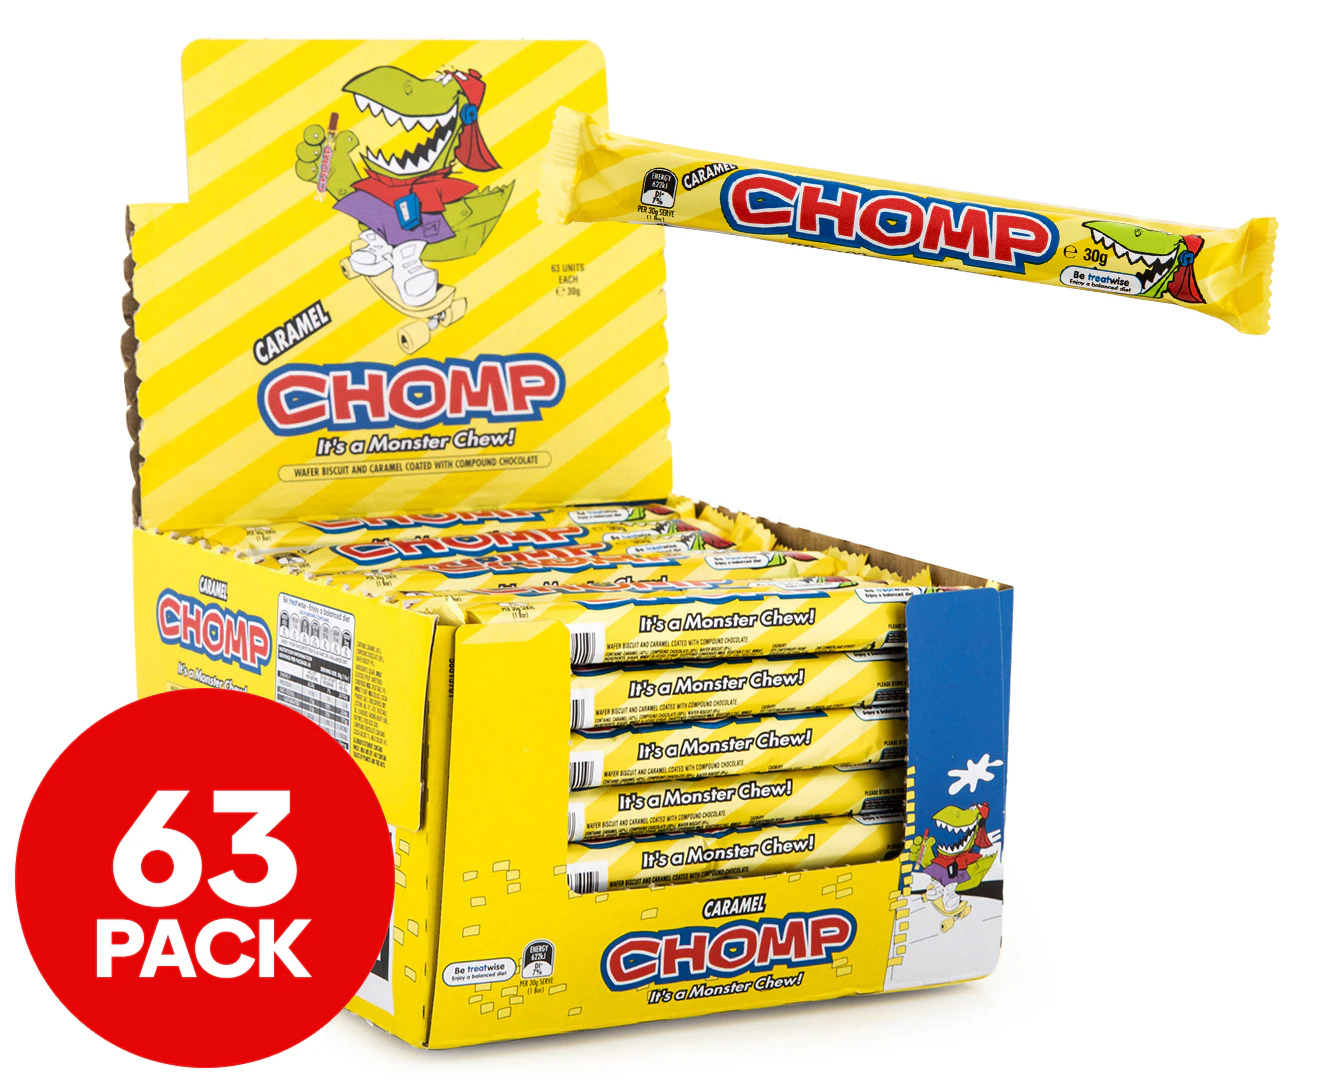 M&M'S Australia - M&M'S M&M's Crispy Mini Eggs are here for Easter  snacking, celebrating, hunts and desserts! ​Smooth Milk Chocolates Mini  Eggs with M&M'S Minis and Crispy pieces. Available now for a